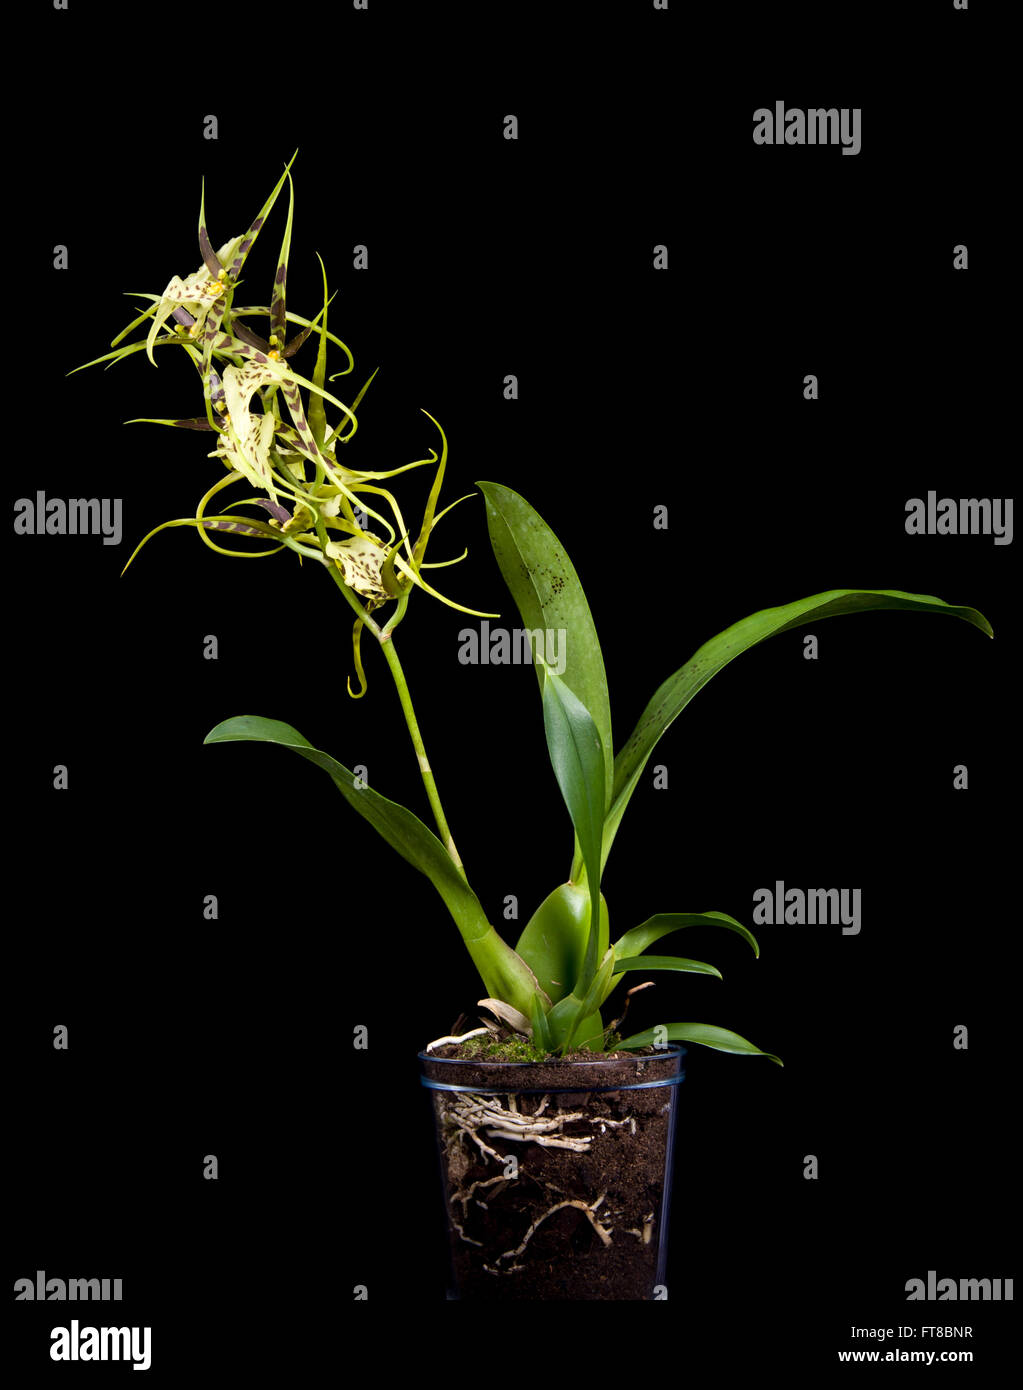 Spotted Brassia orchid on black background Stock Photo